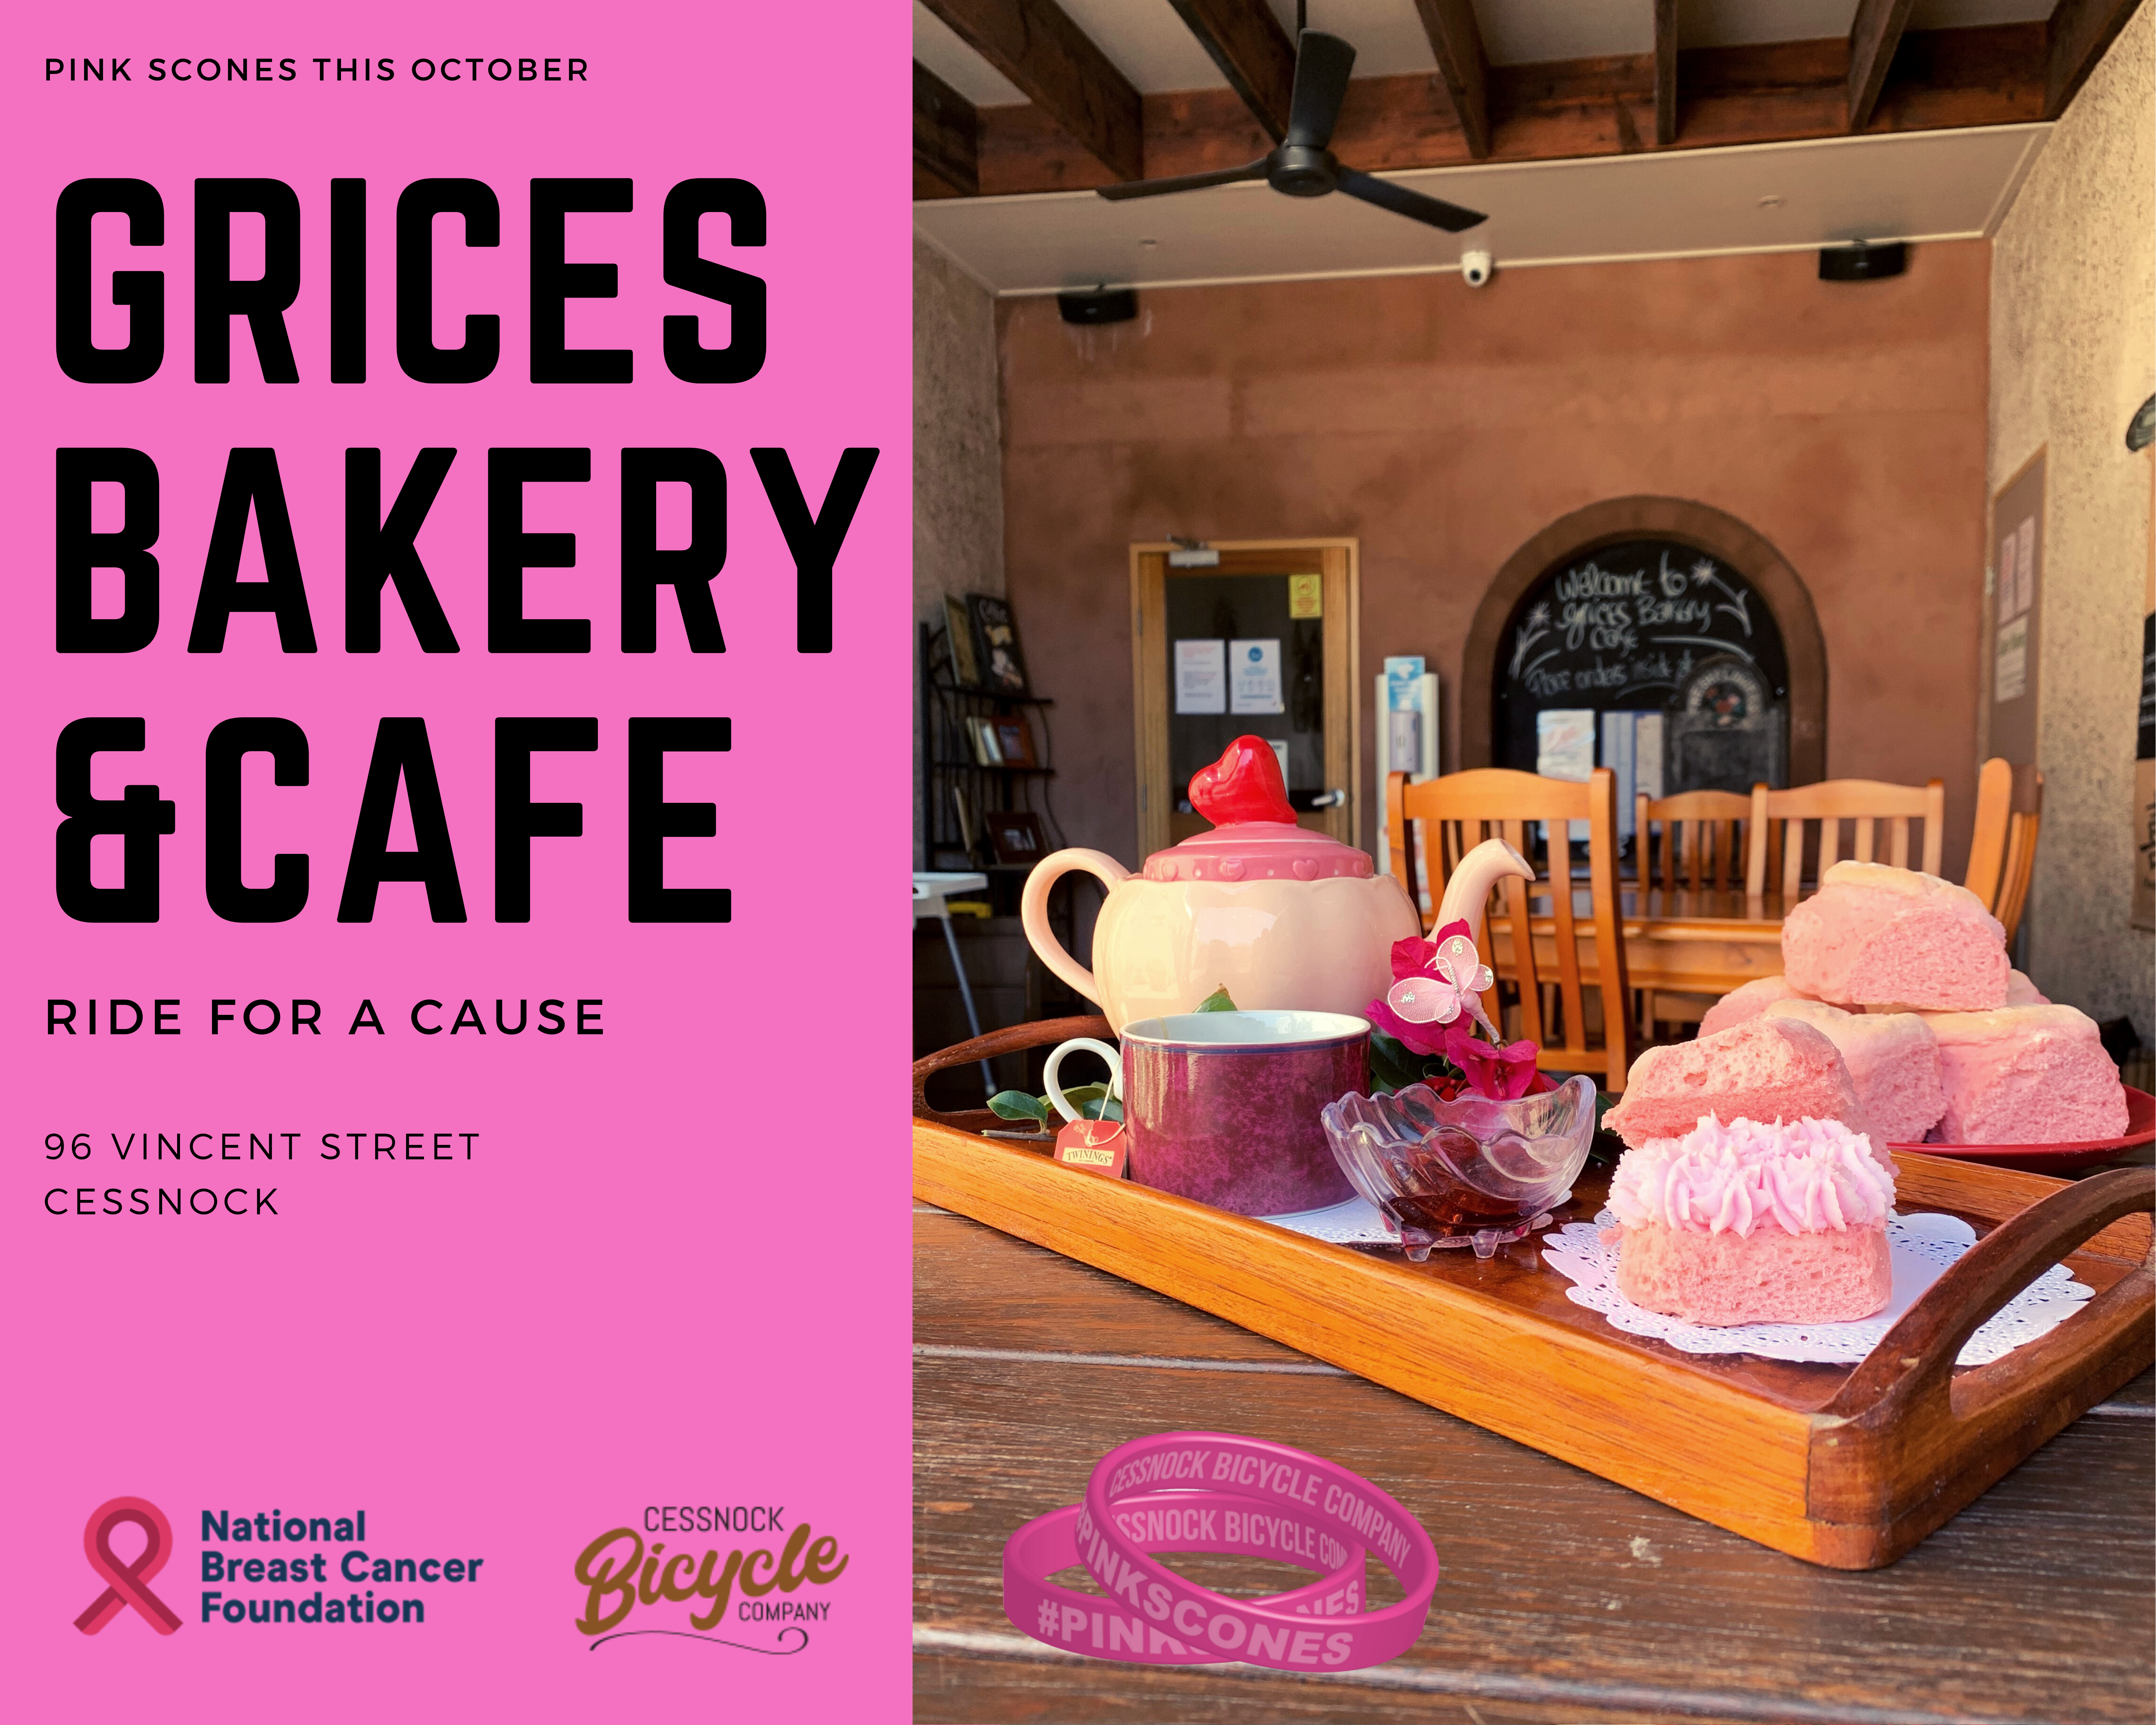 Cycle for PINK SCONES this October